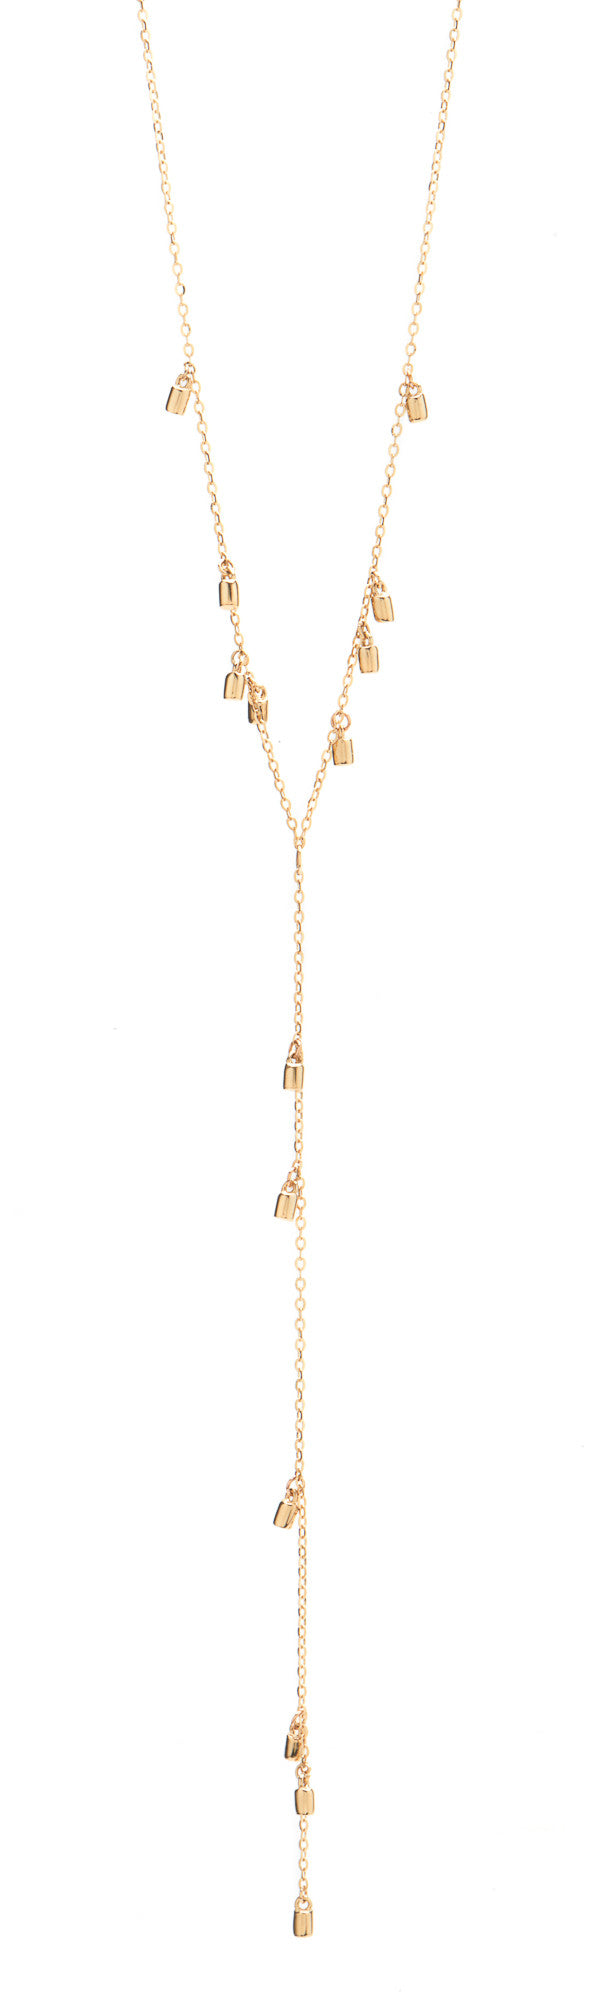 Gold Fairy Dust Lariat Necklace